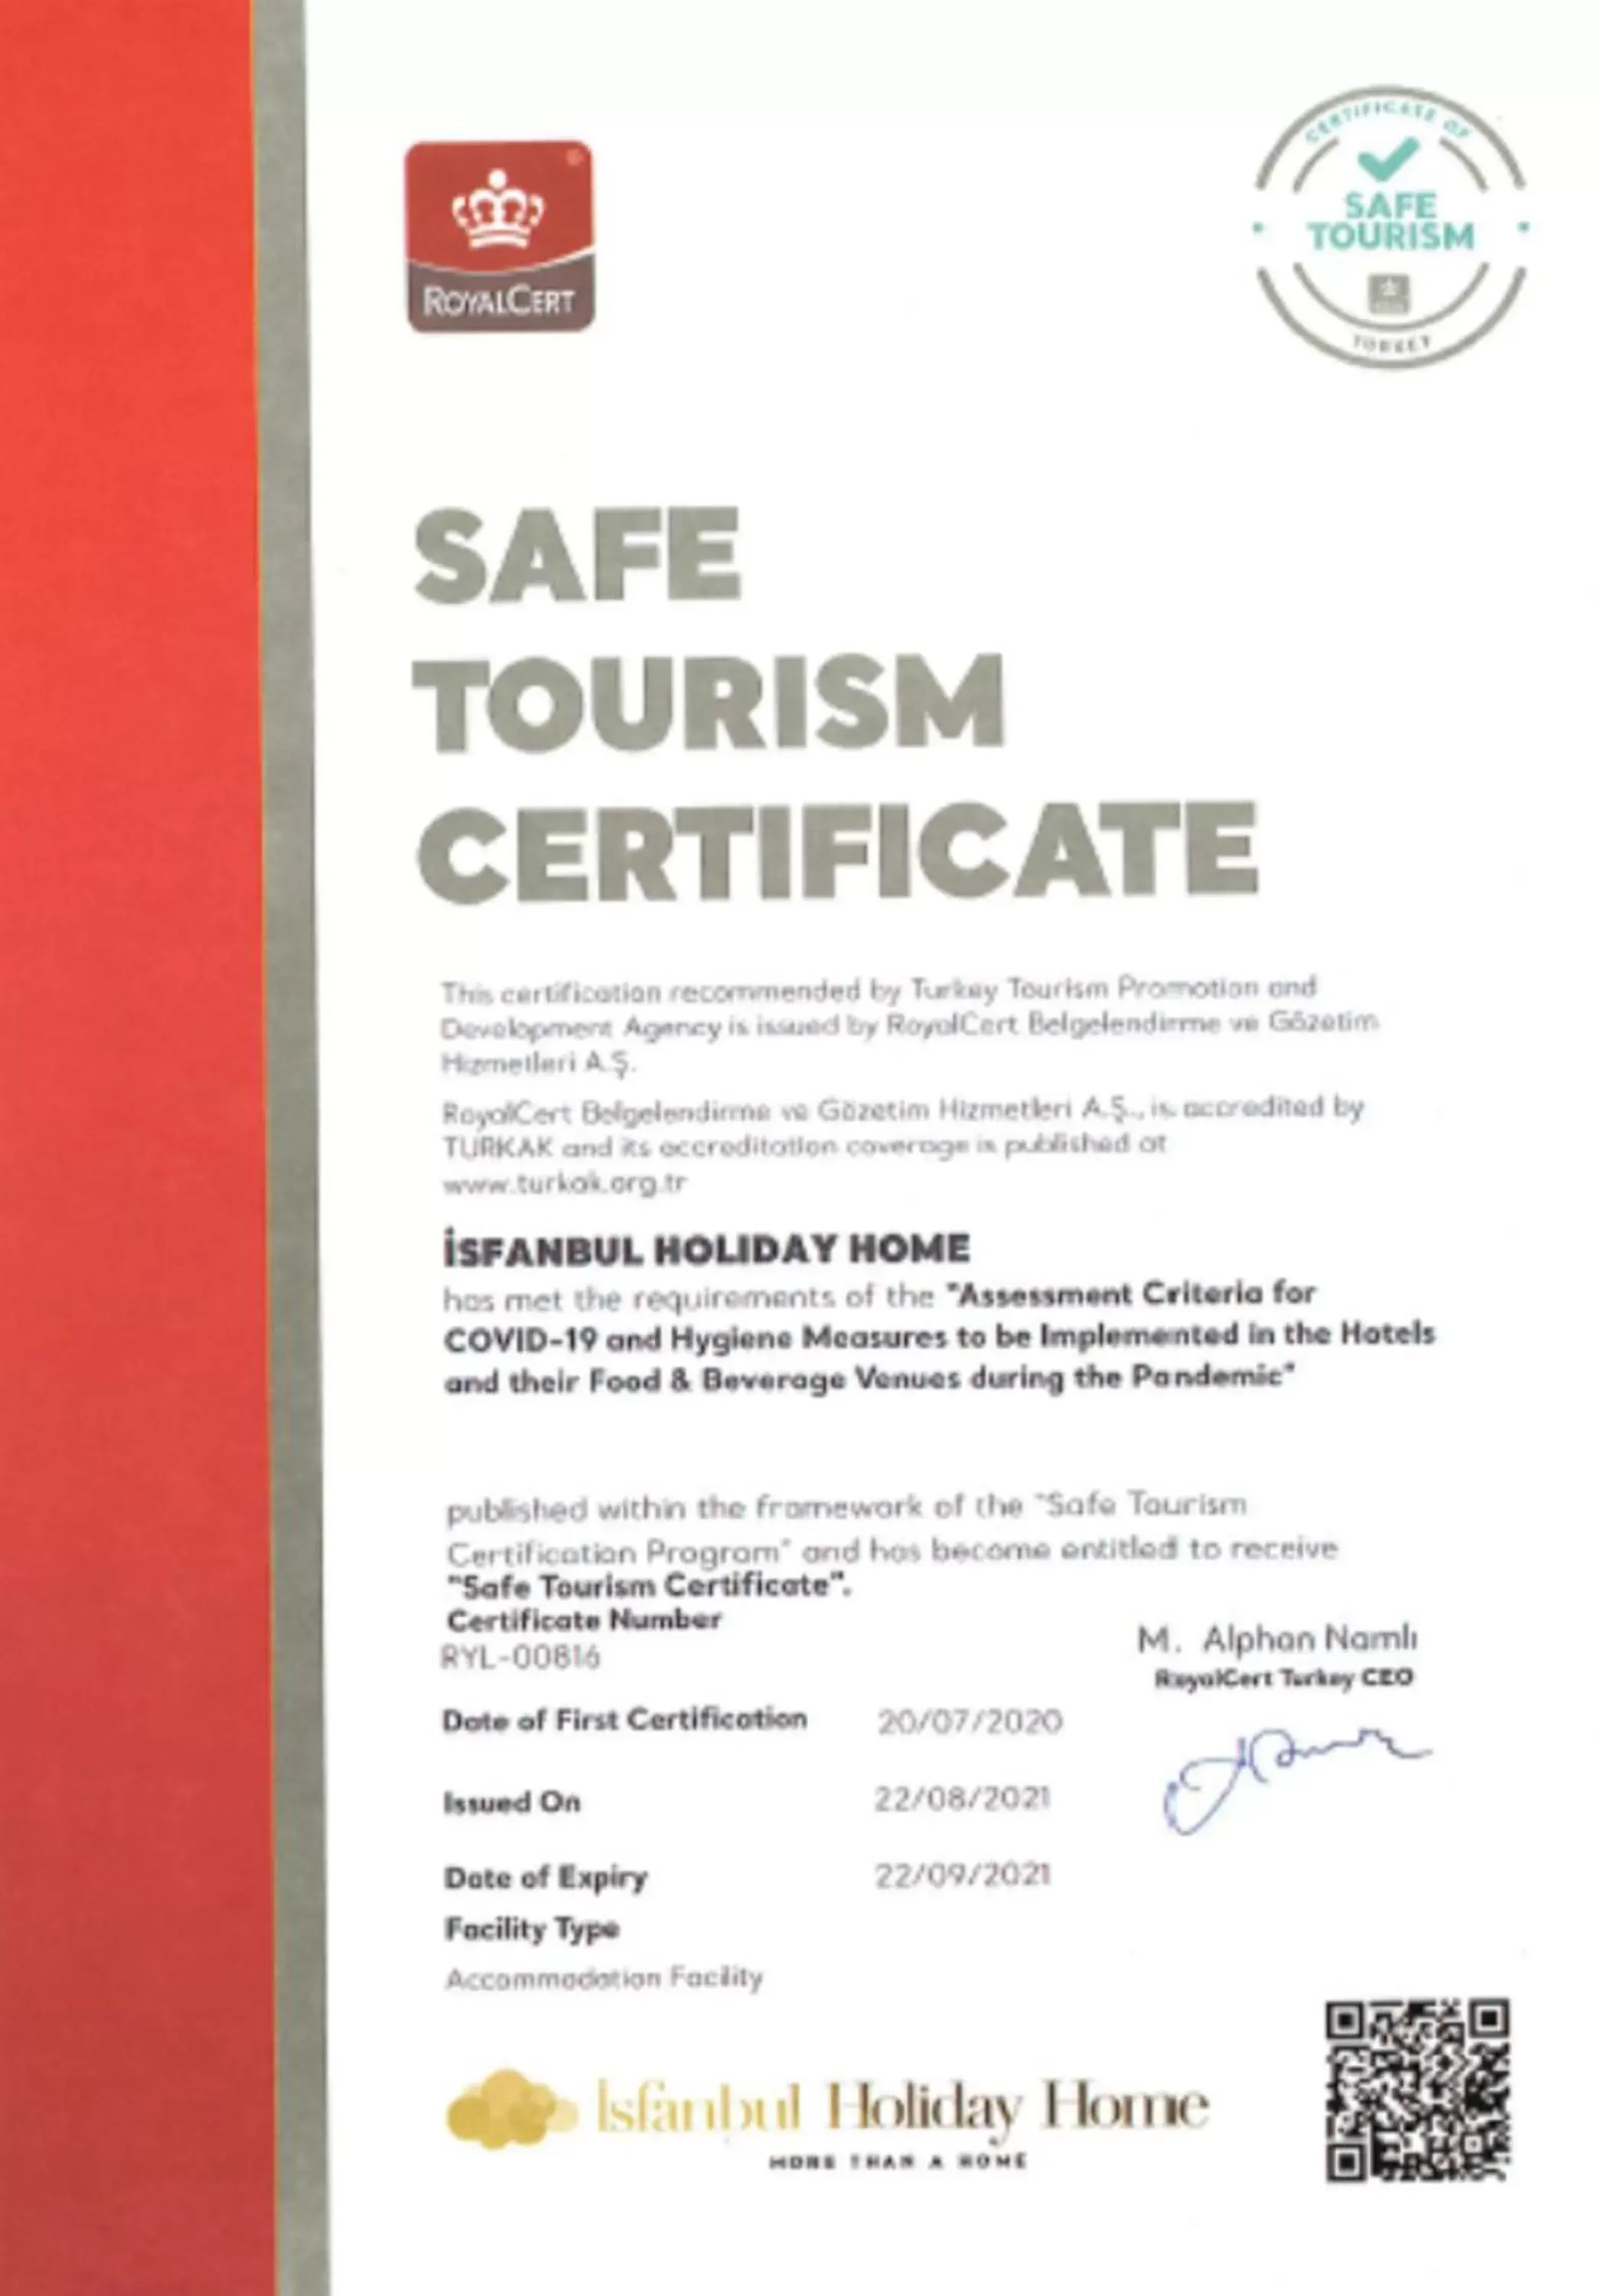 Certificate/Award in Vialand Palace Hotel